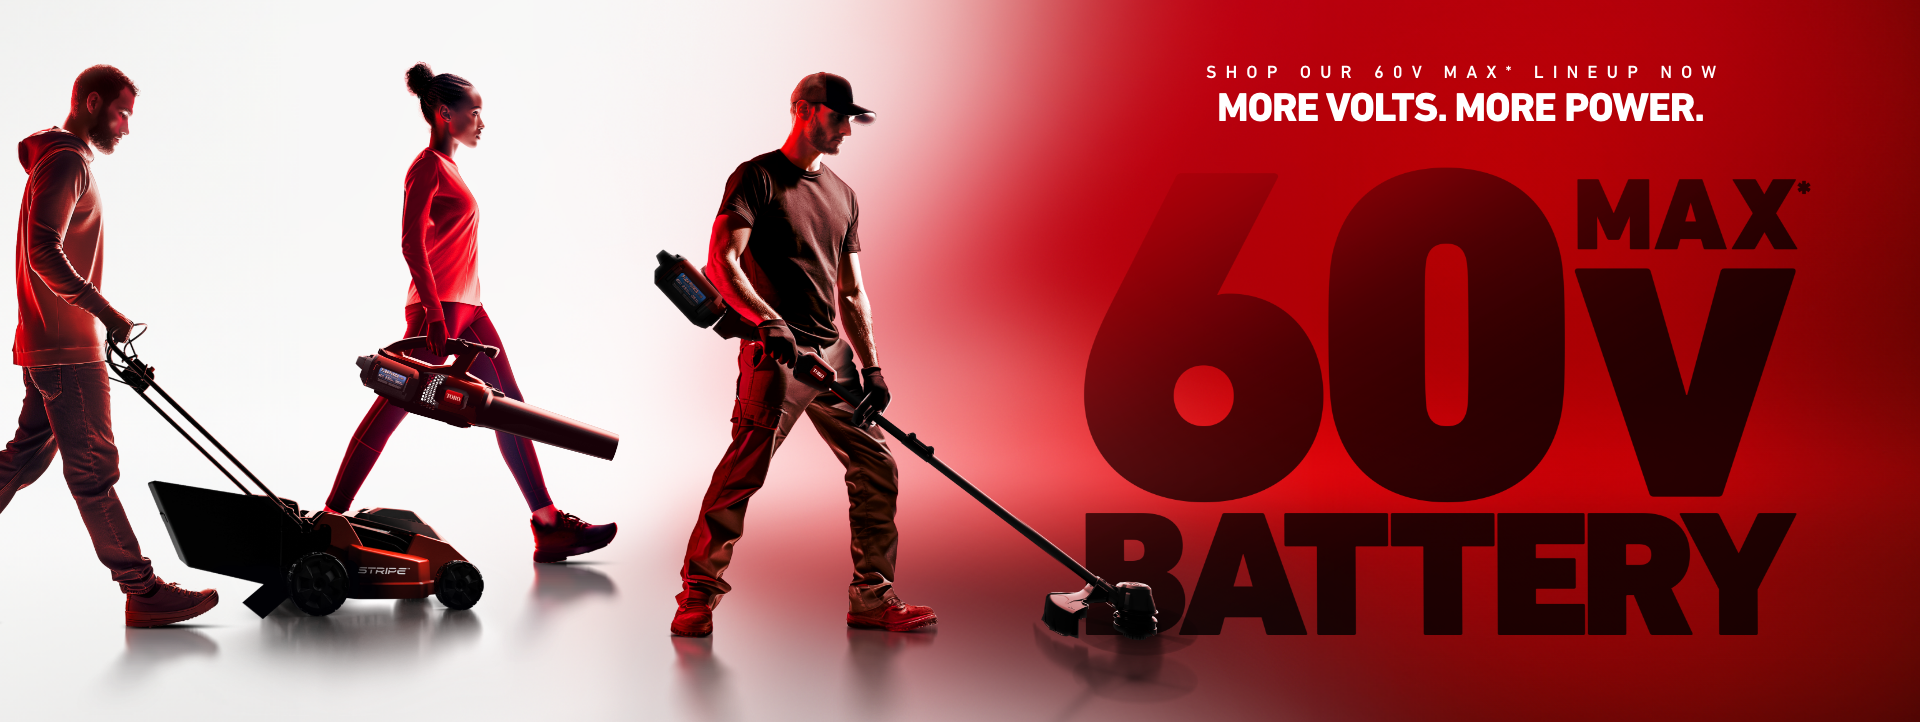 Interchangeable 60V Max Battery - Any Job. Any Season. Shop our Full Lineup of Battery Tools Now